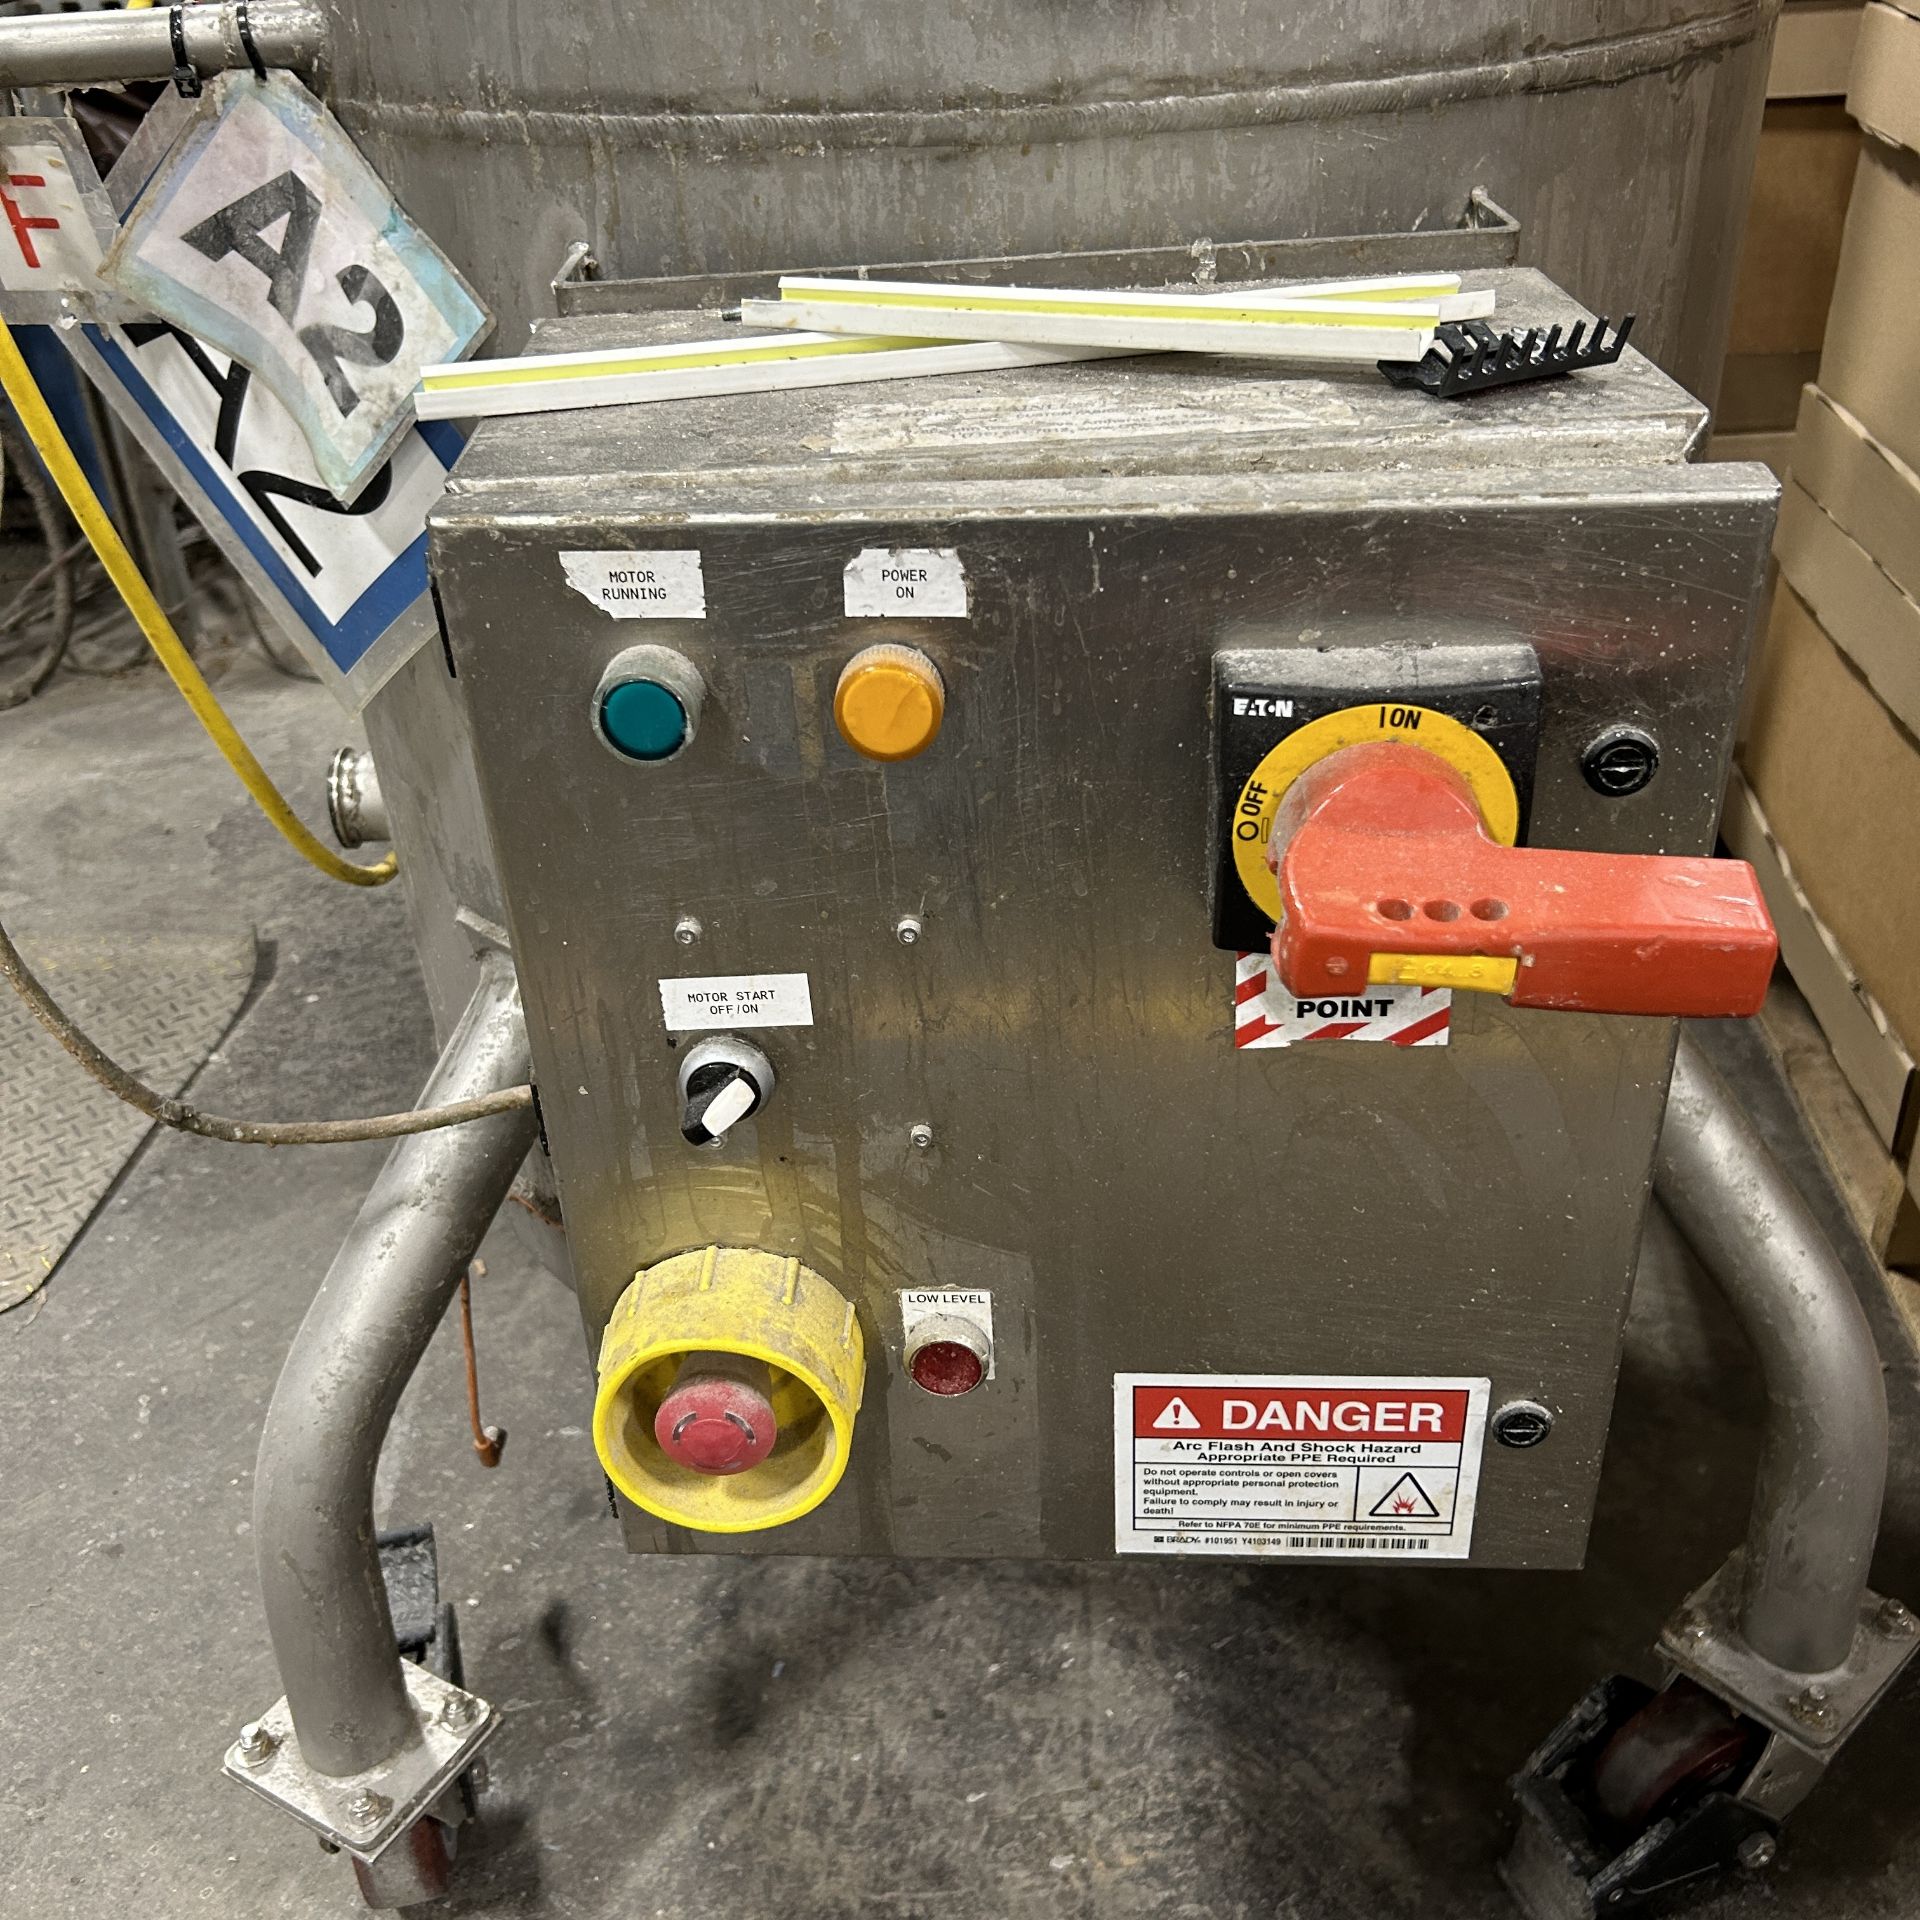 2020 Amherst Stainless Steel Agitation Pressure Pot - Image 3 of 8